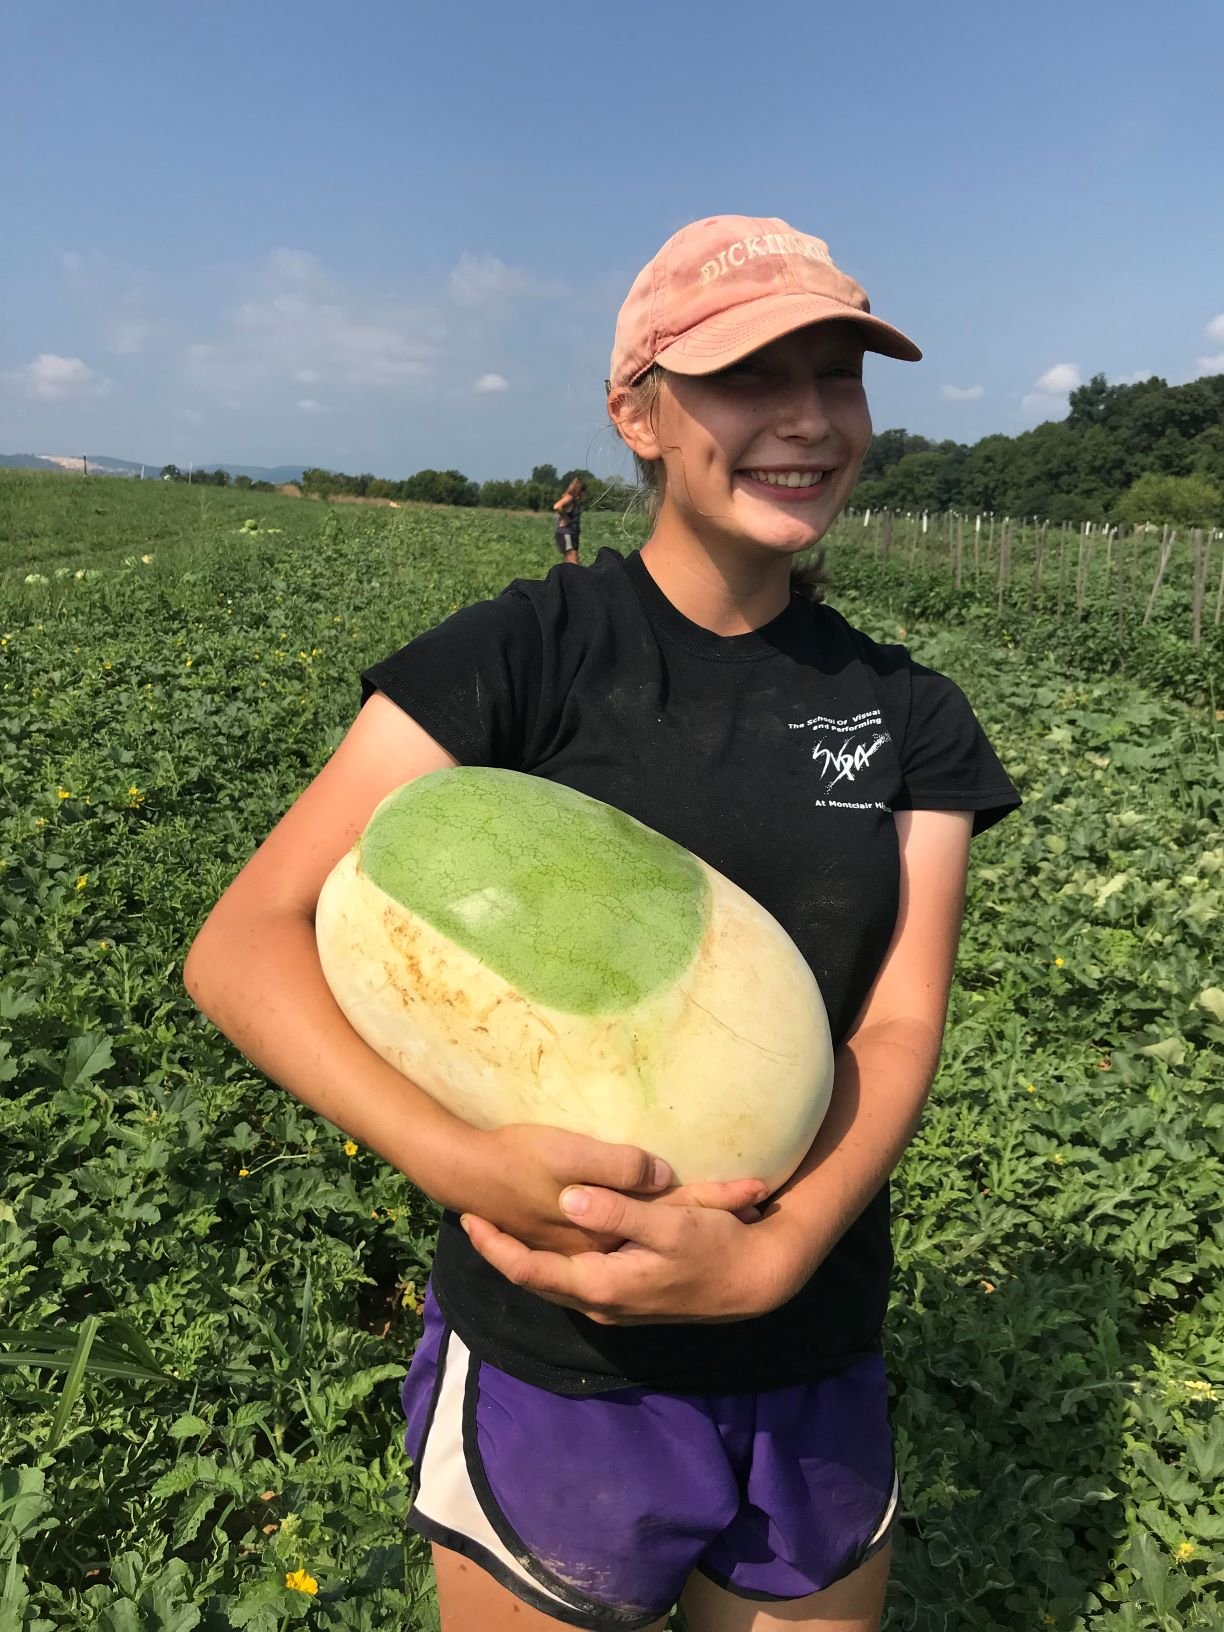 Friday CSA: Dickinson College Farm Field Notes for Week of August 5th